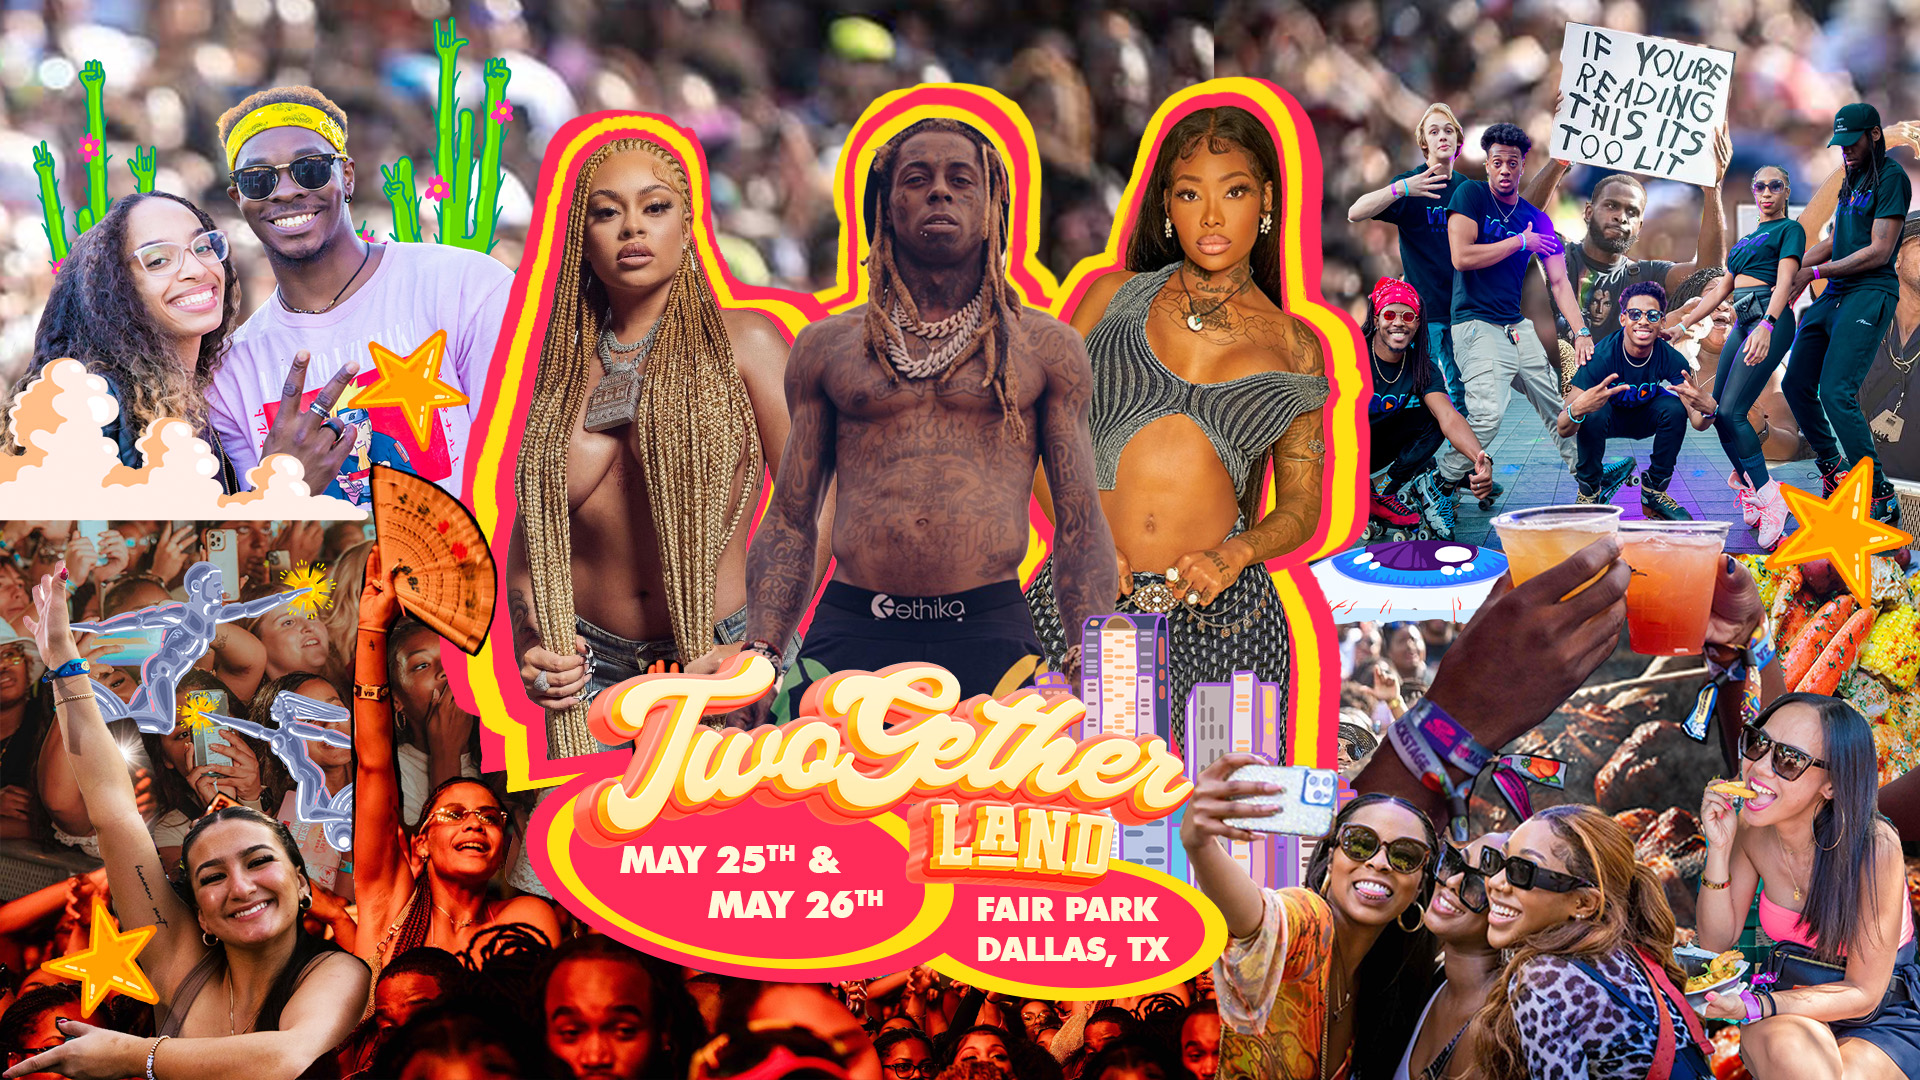 Roomies! Enter To Win Platinum Tickets To TwoGether Land Featuring Lil Wayne, Summer Walker, Latto, And More!